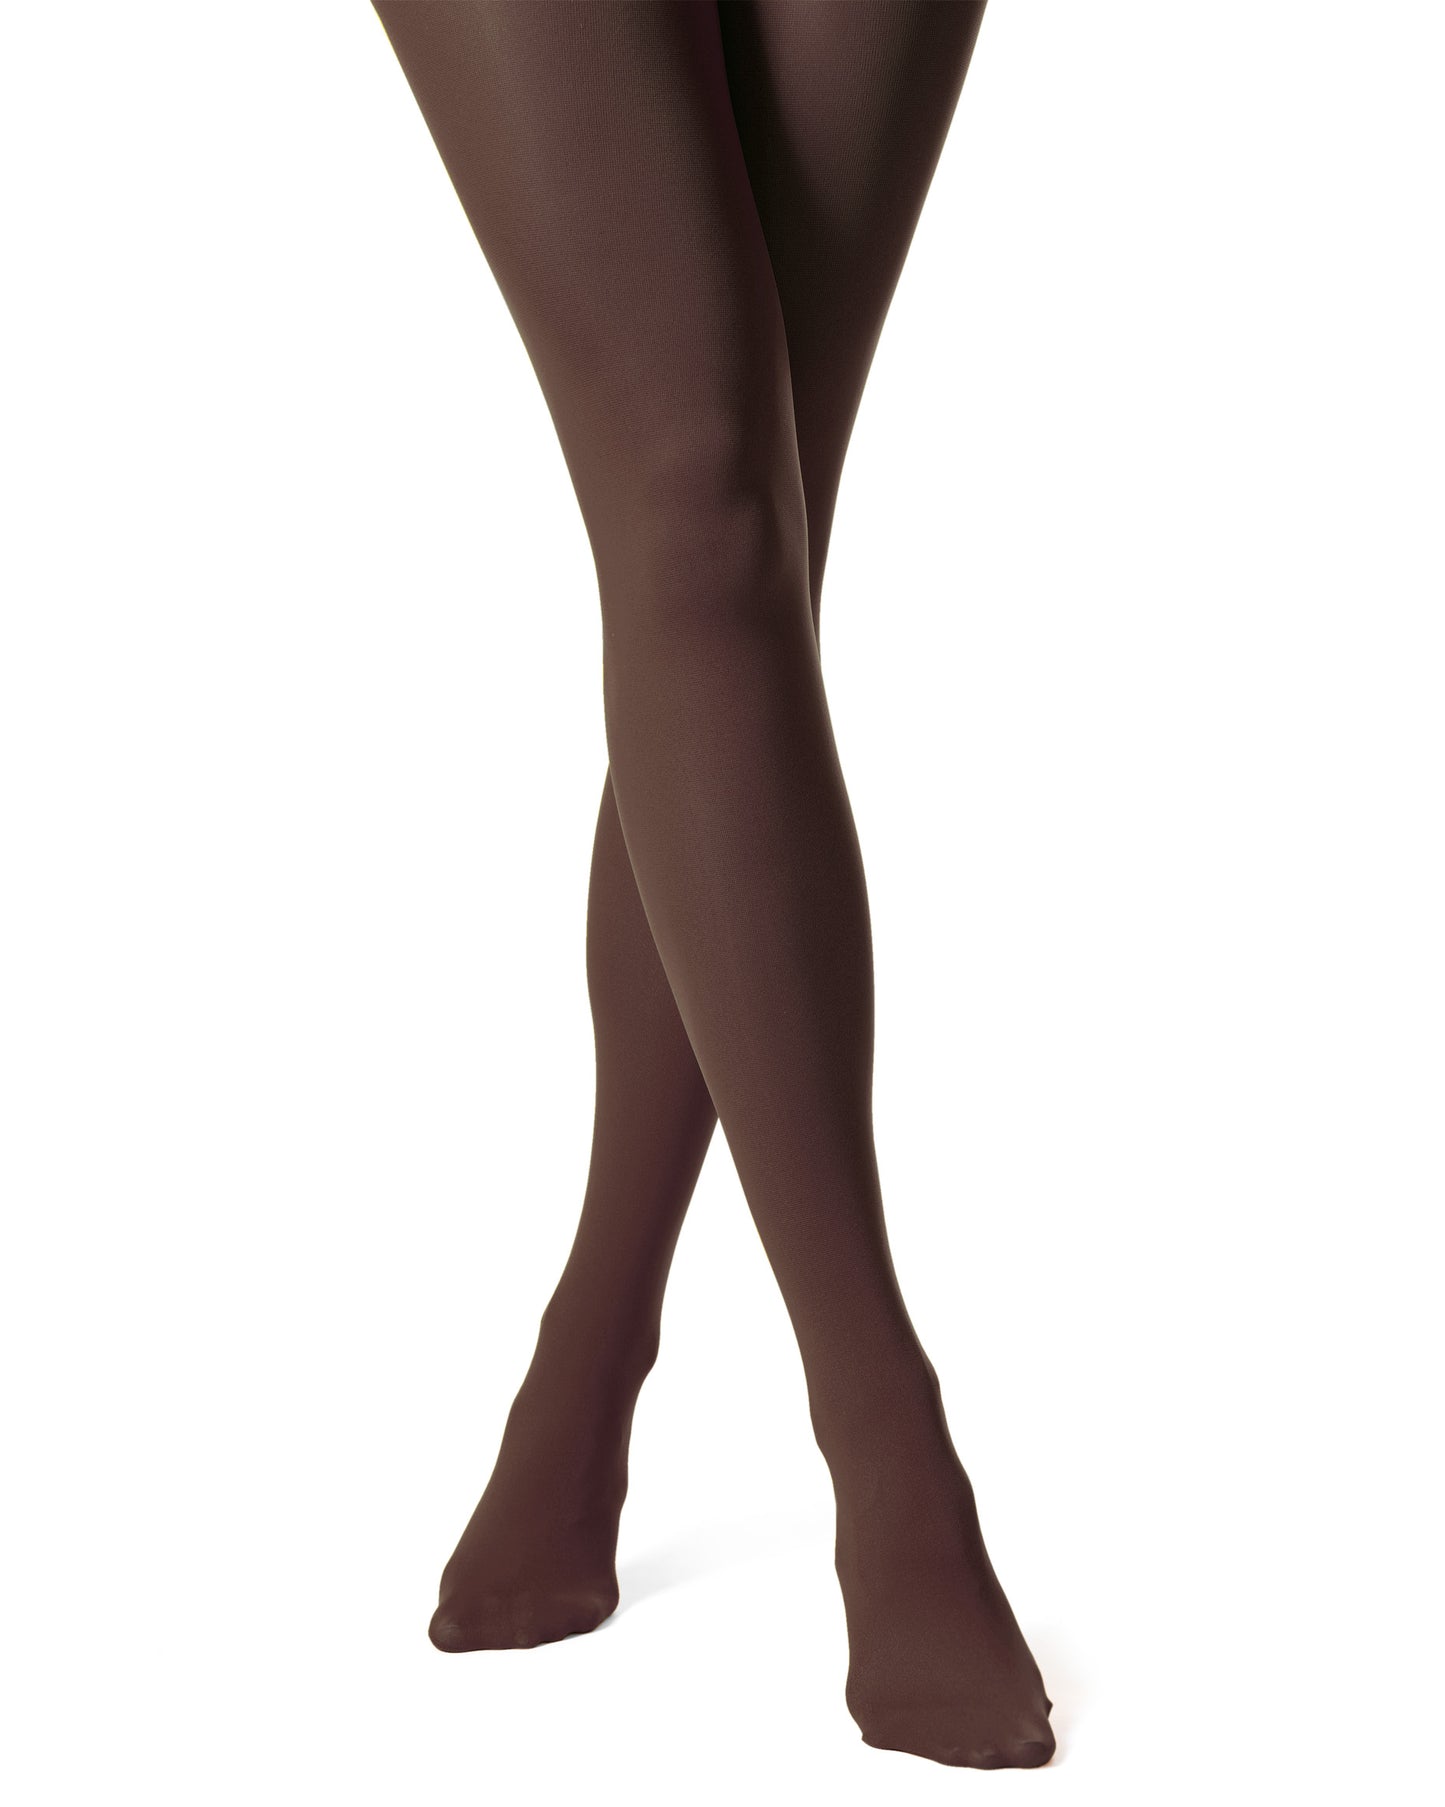 Trasparenze Sophie 70 Collant - coloured opaque tights in brown (nutella)